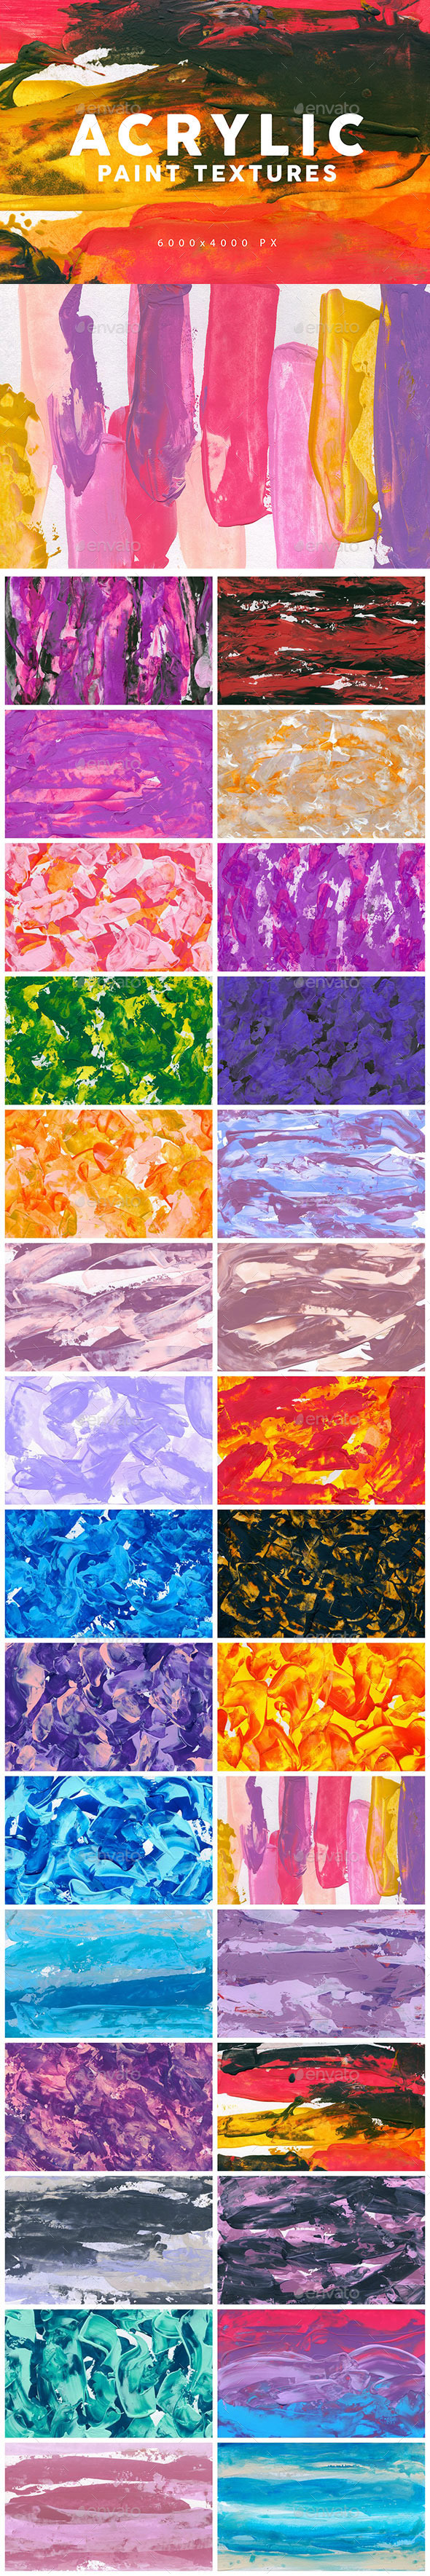 [DOWNLOAD]Acrylic Paint Textures 1